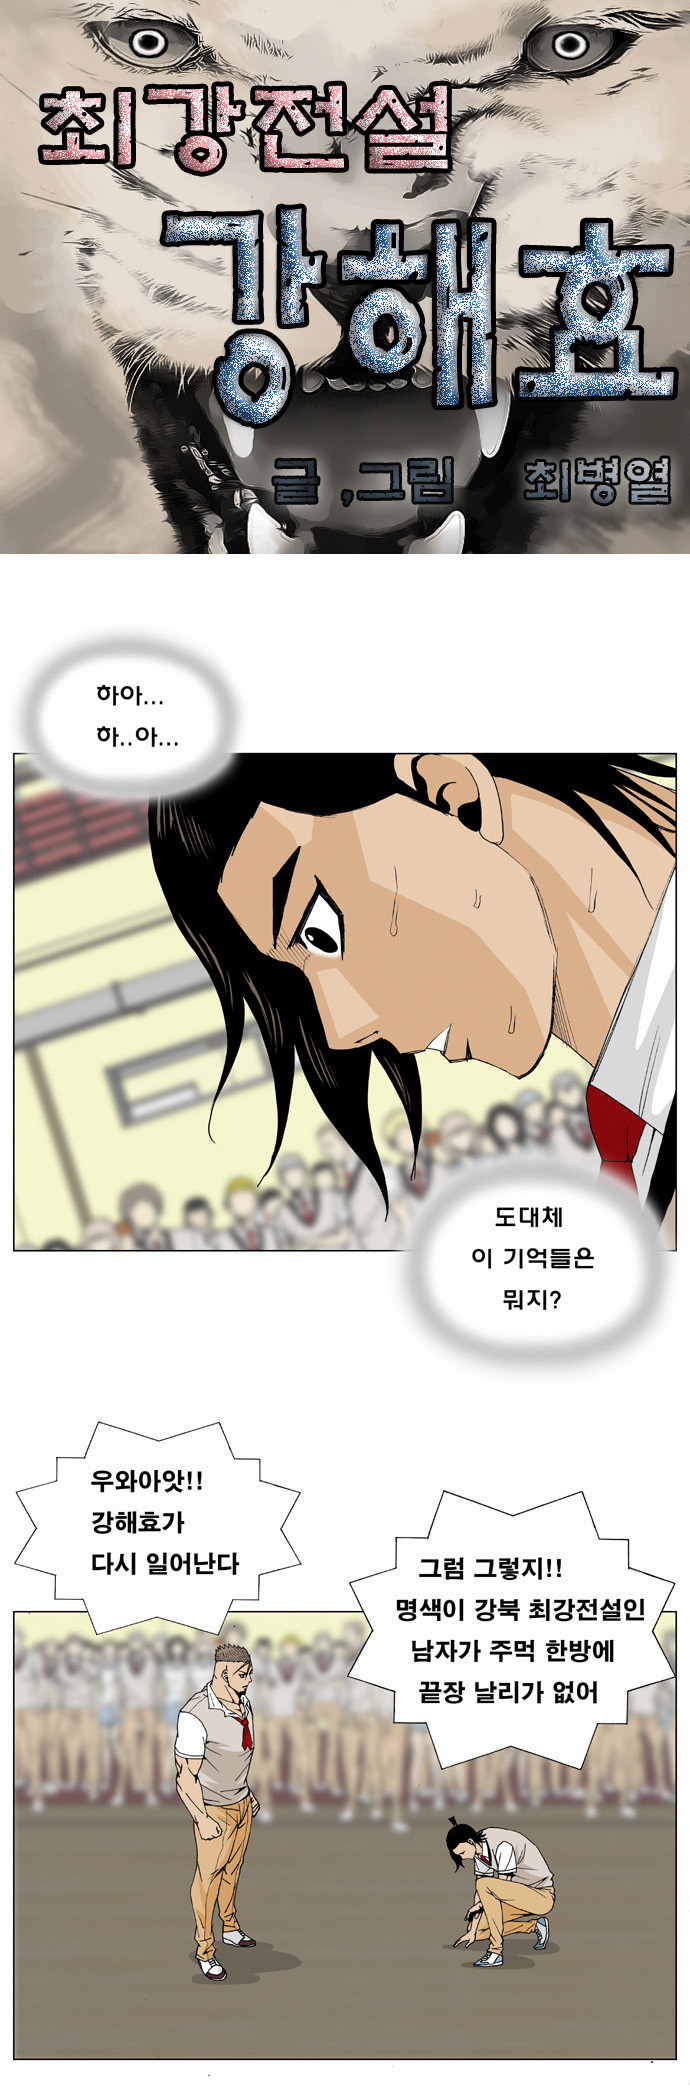 Ultimate Legend - Kang Hae Hyo - Chapter 7 - Page 2